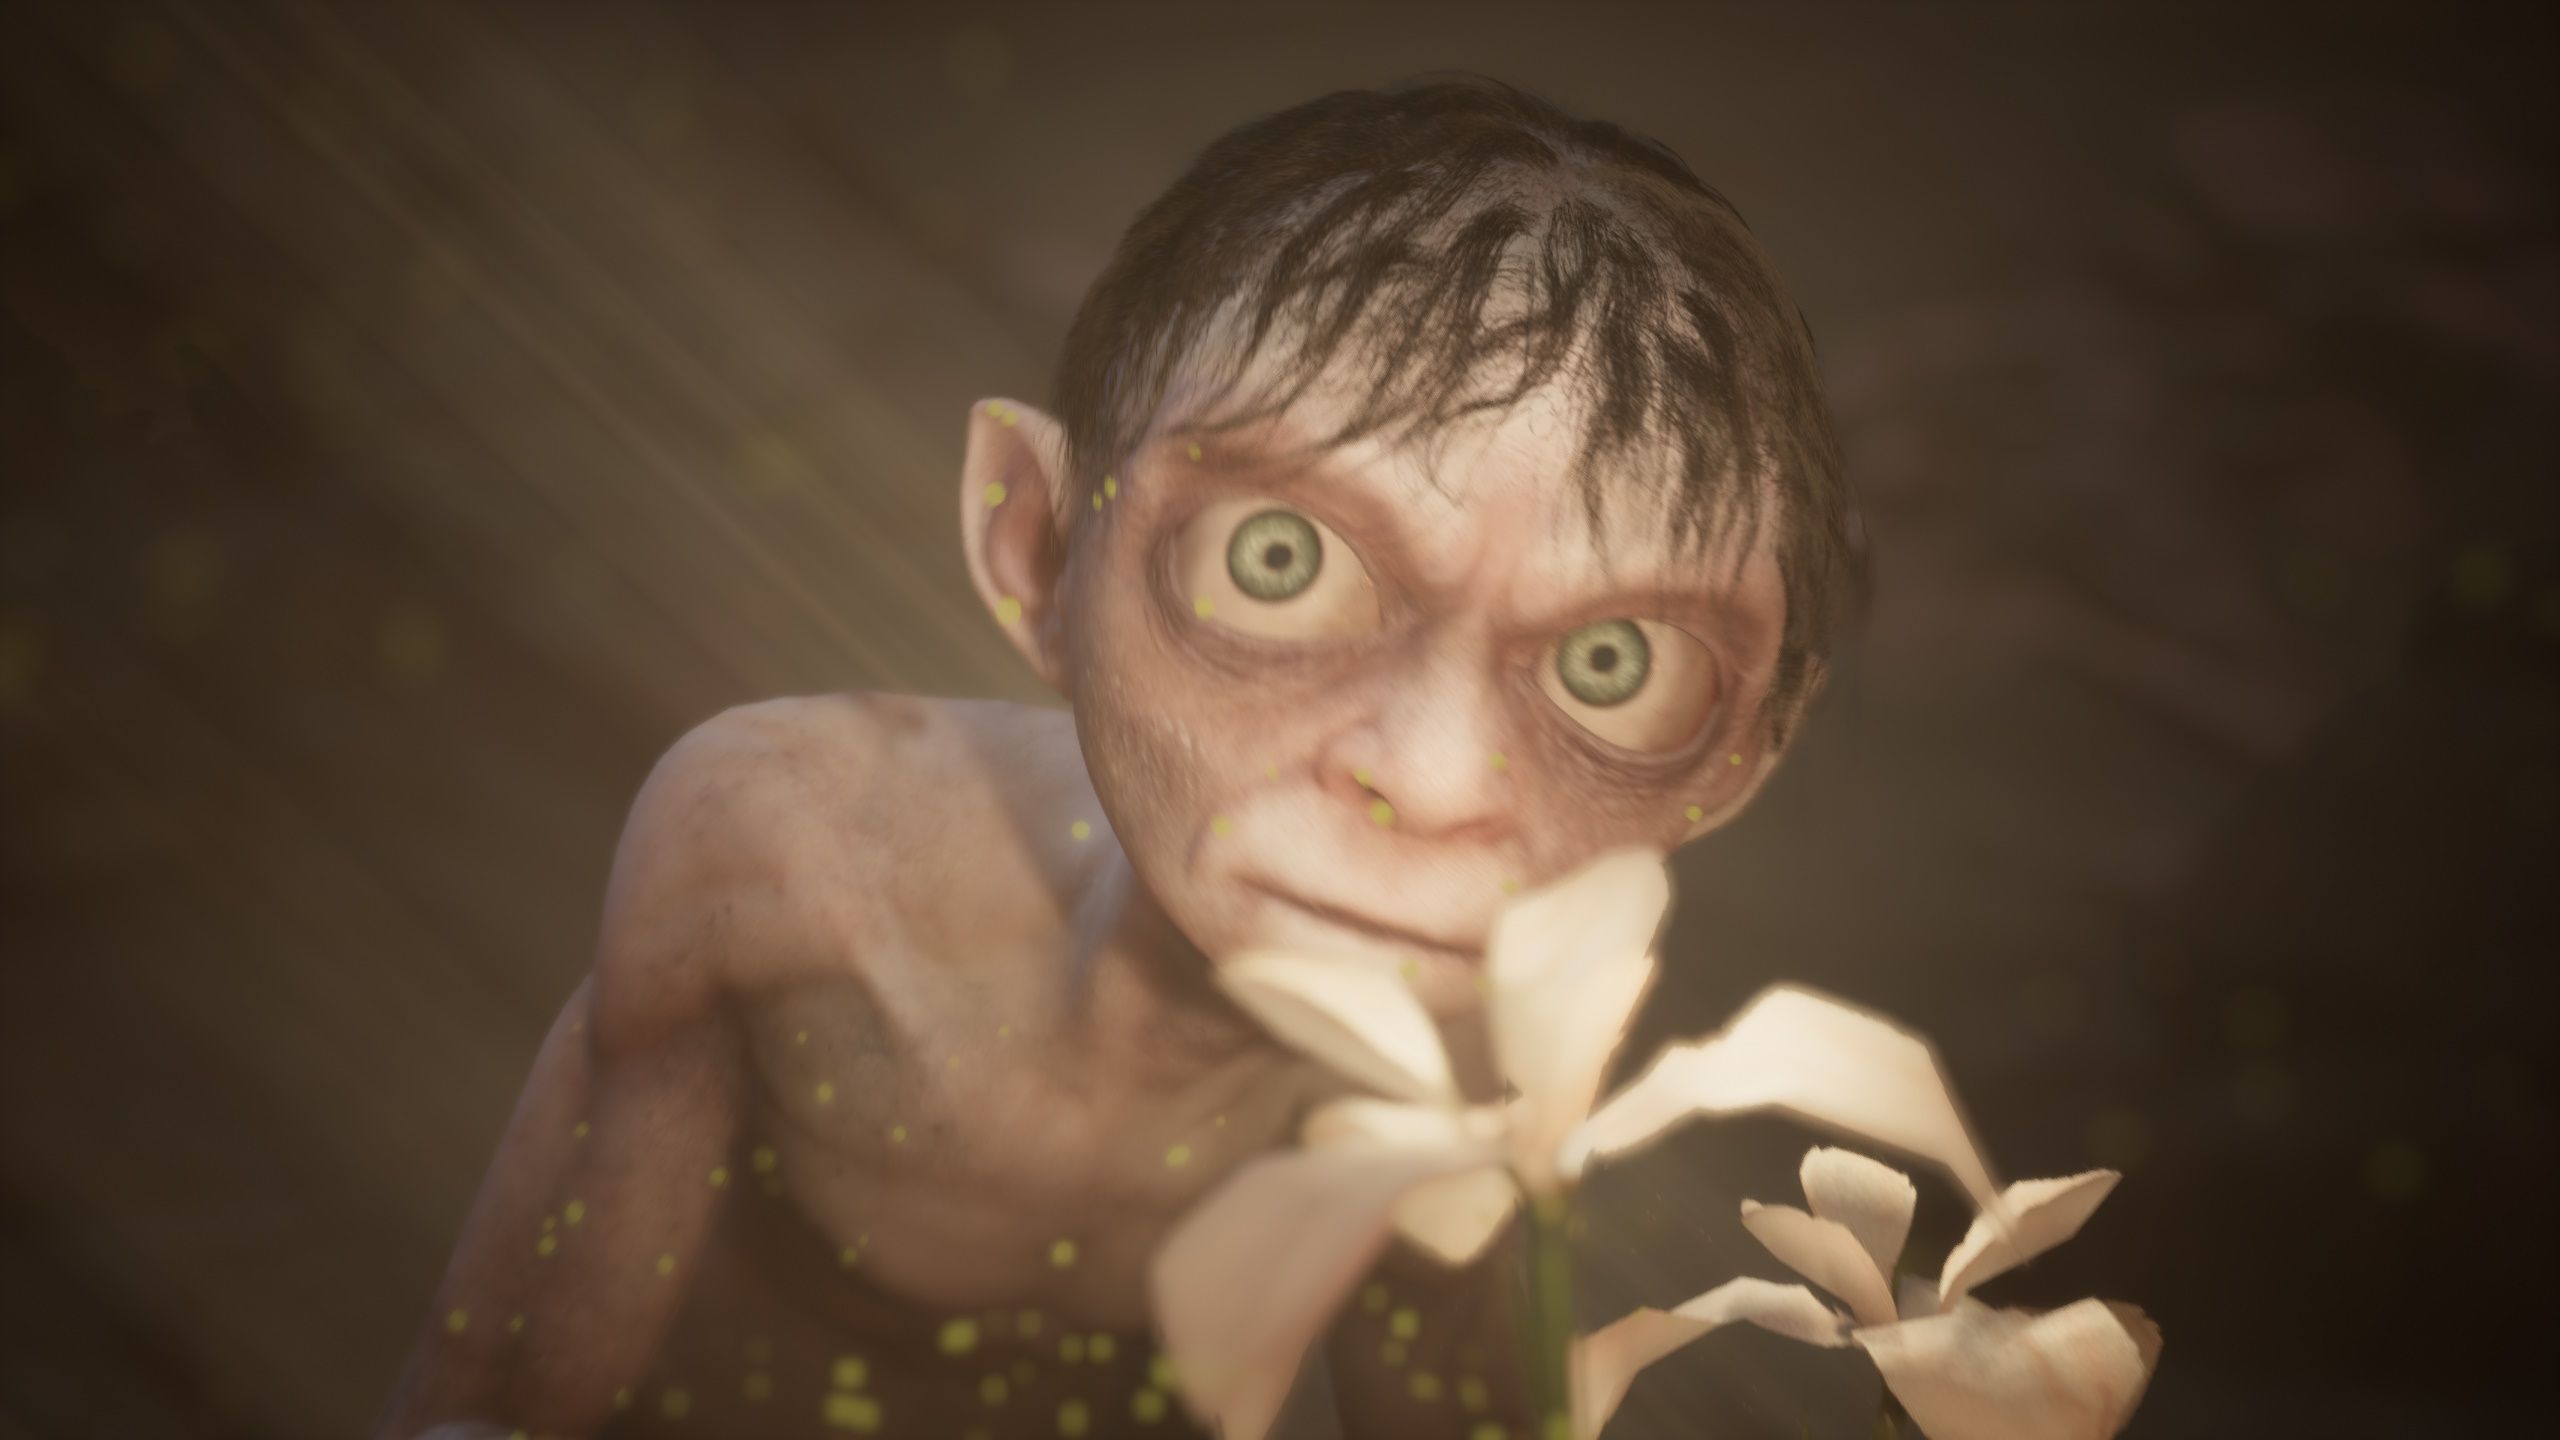 The Lord Of The Rings: Gollum Dev Apologises For Underwhelming Launch  State